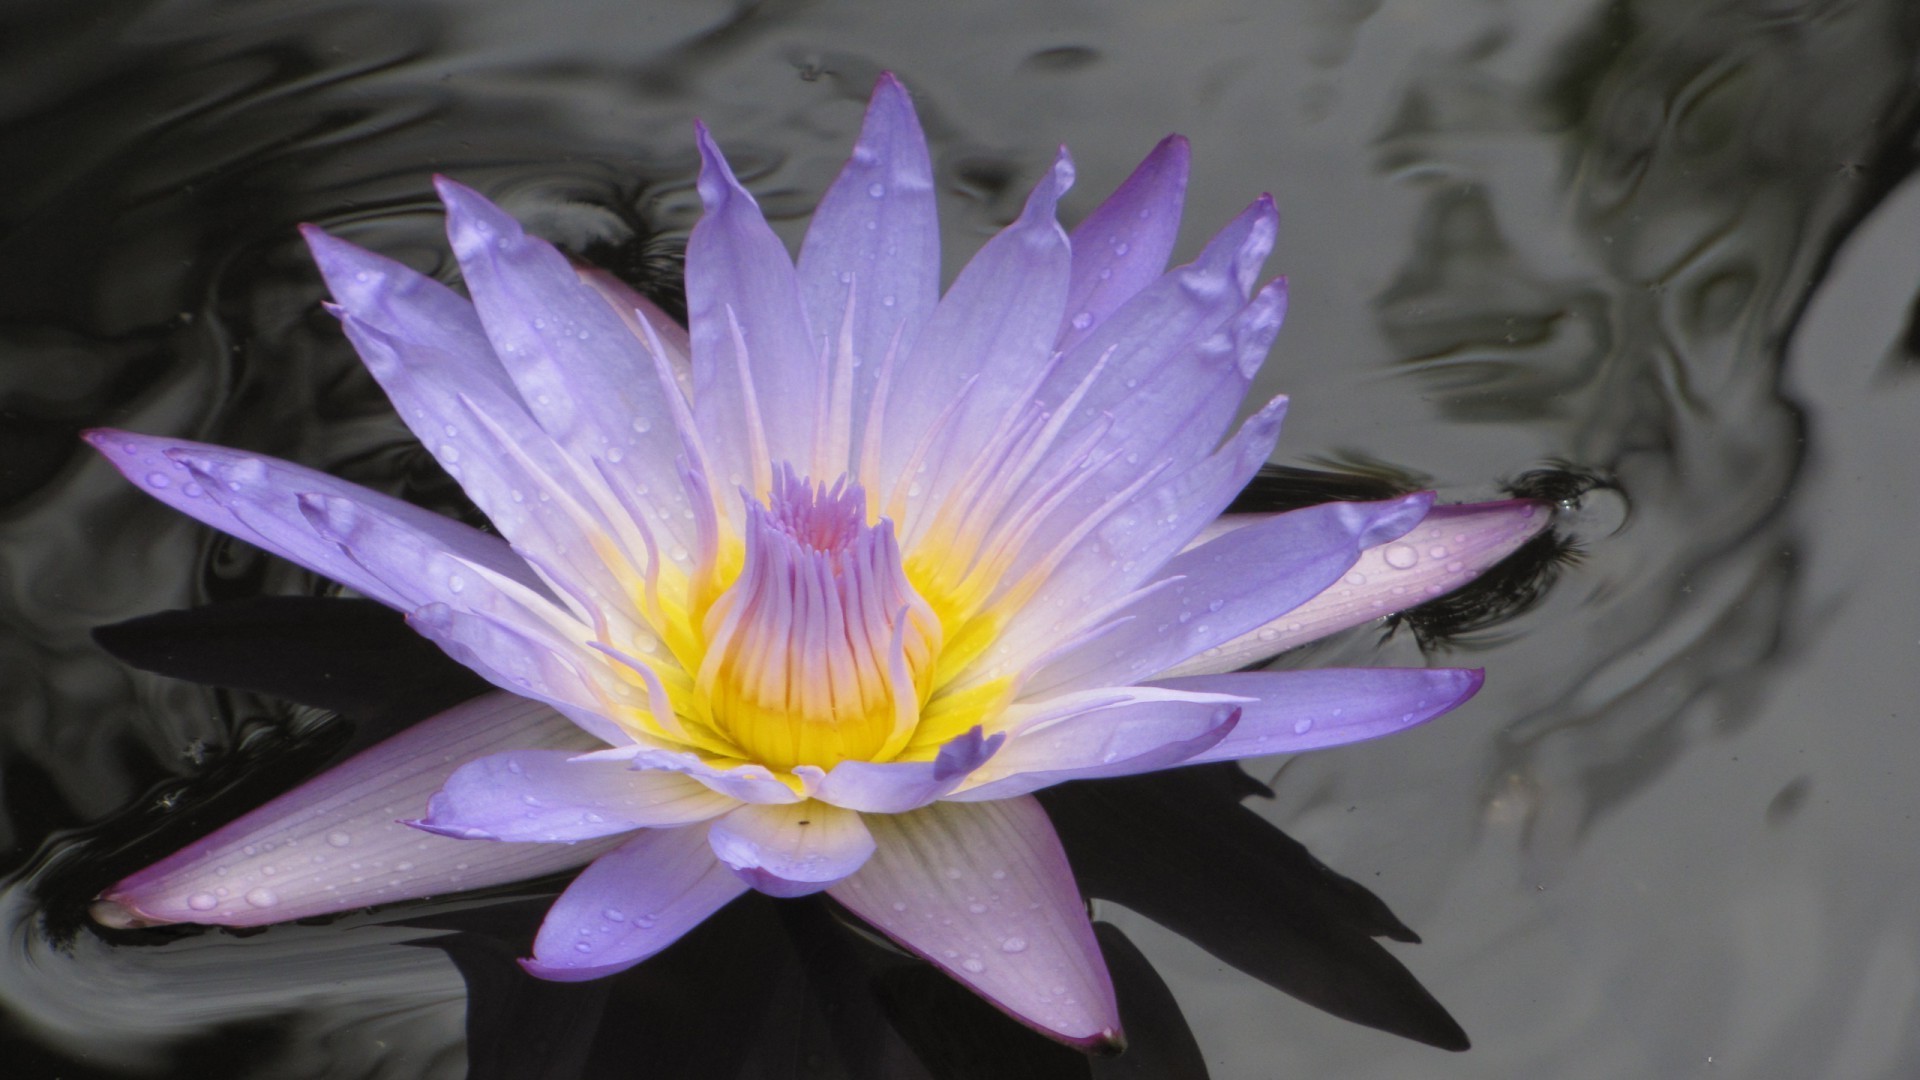 flowers in water lotus flower pool nature flora blooming aquatic leaf beautiful lily garden petal swimming exotic summer waterlily zen tropical color floral